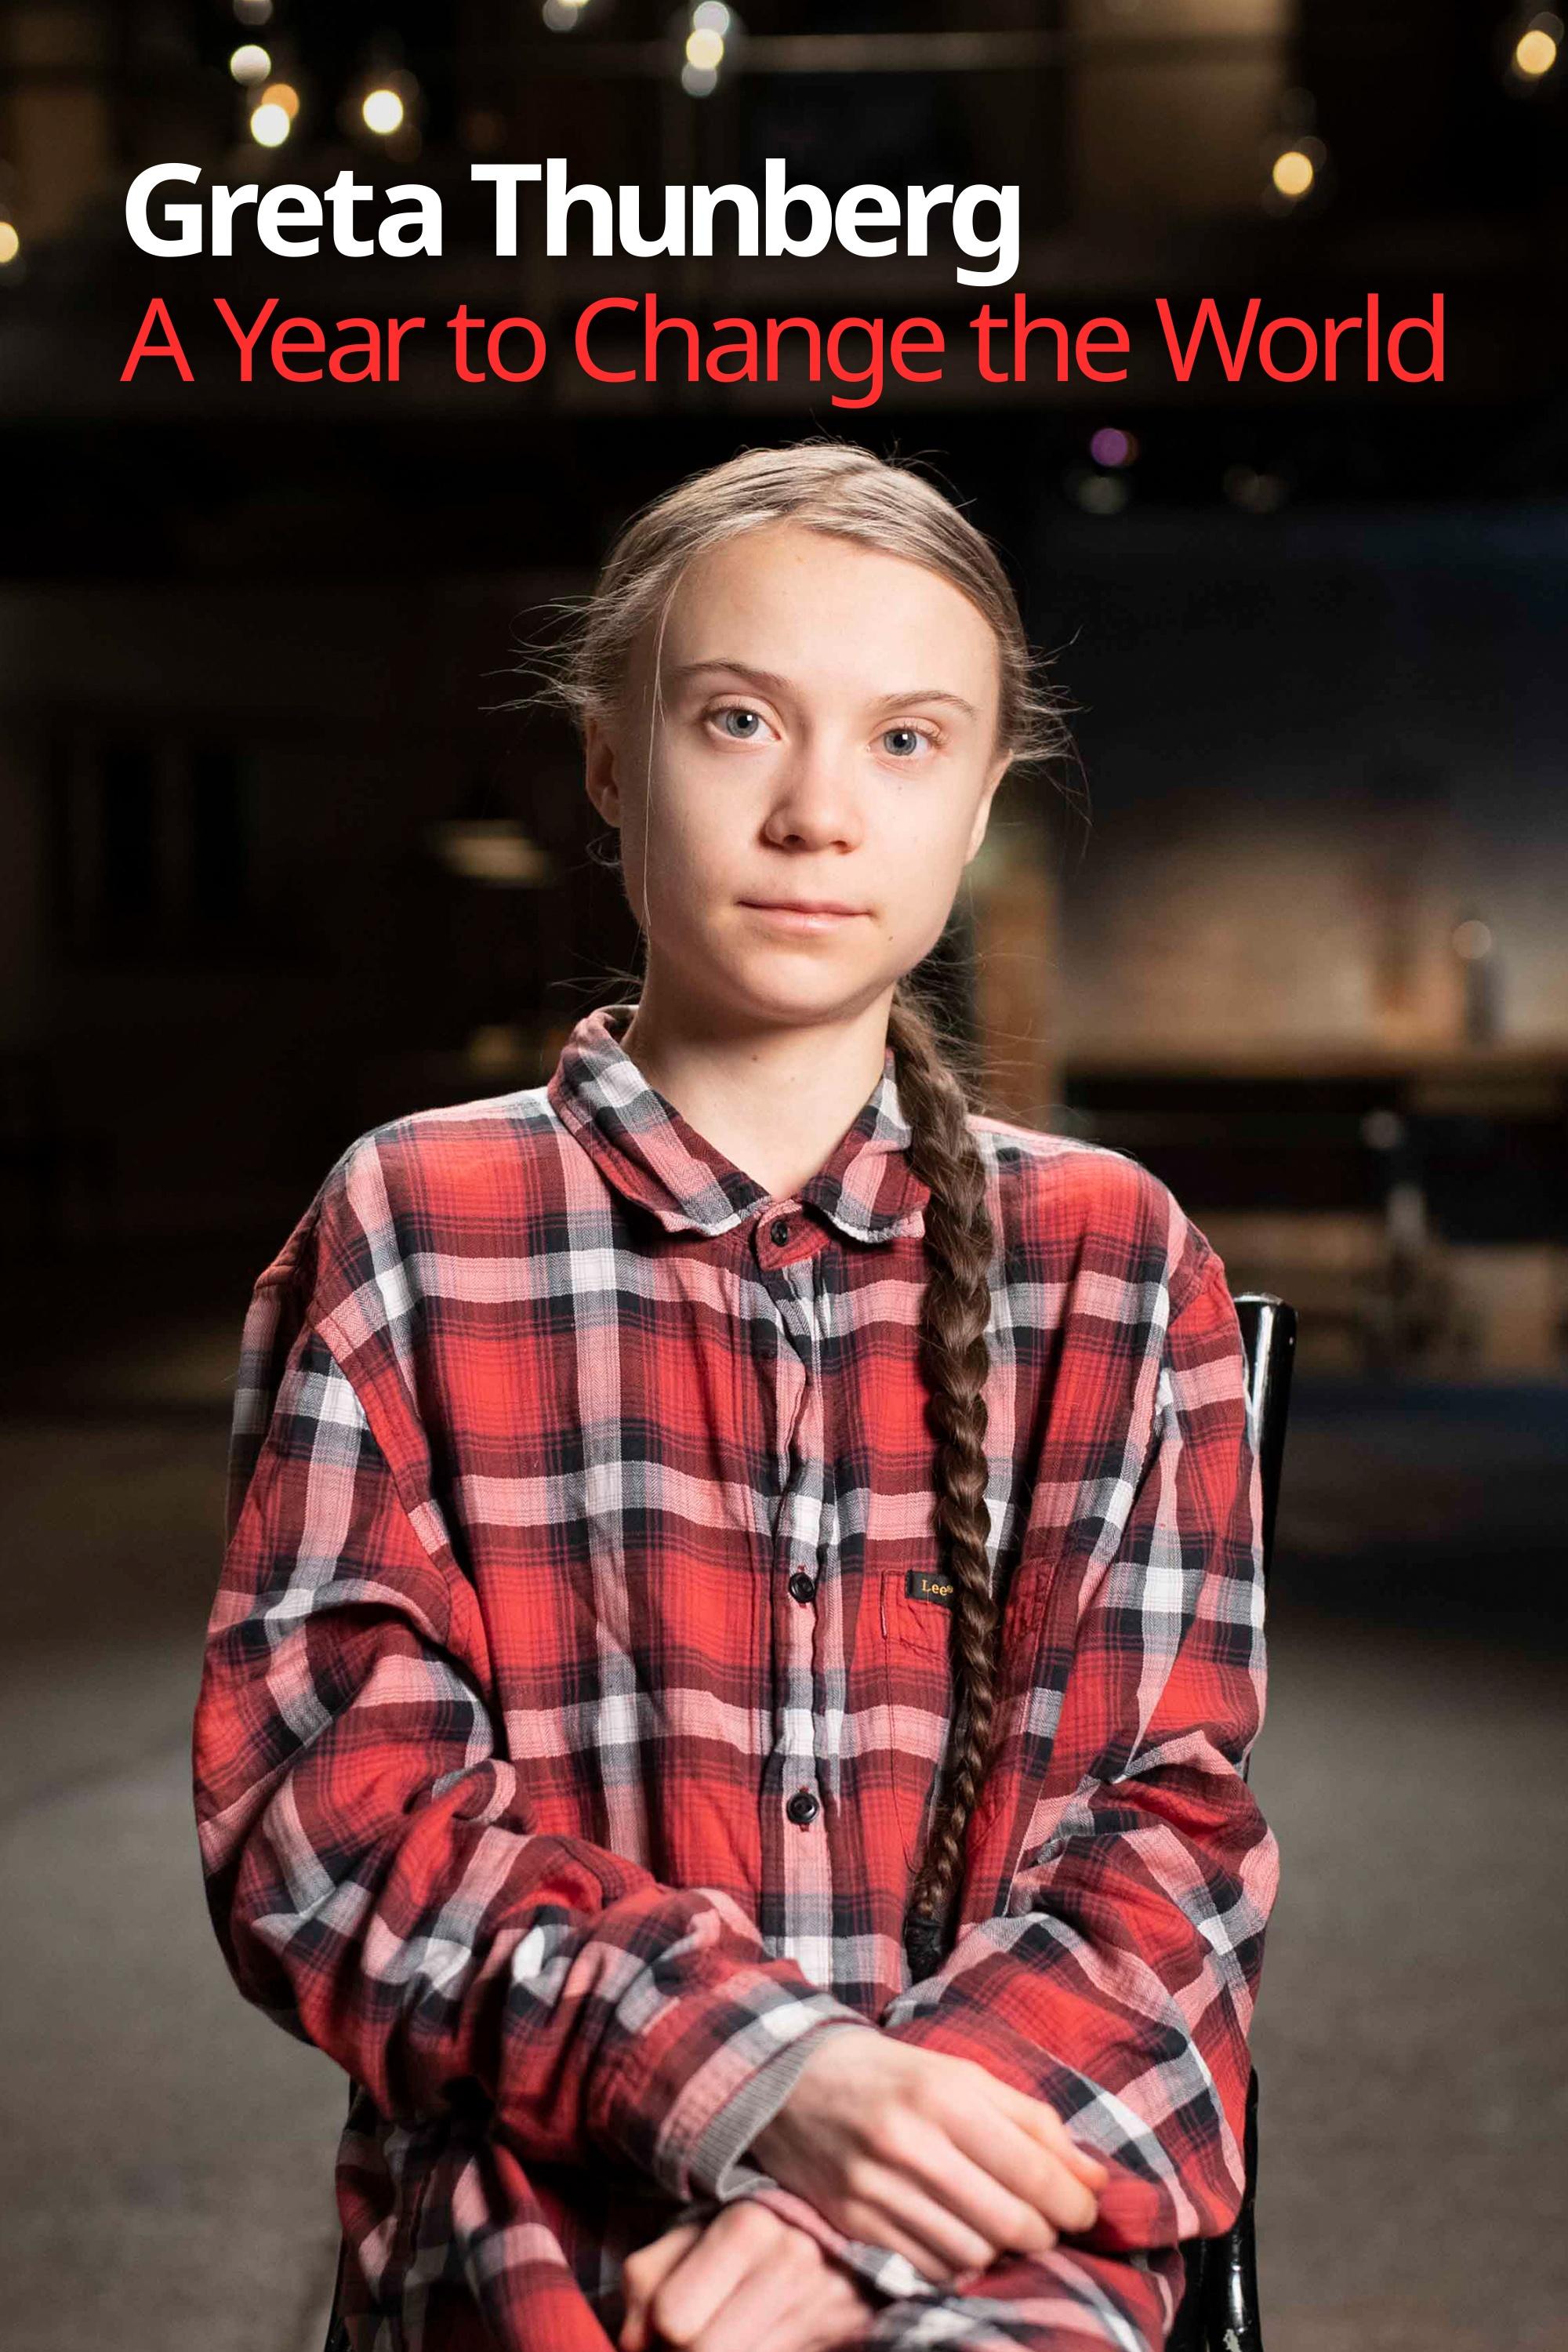 Greta Thunberg: A Year to Change the World show's poster